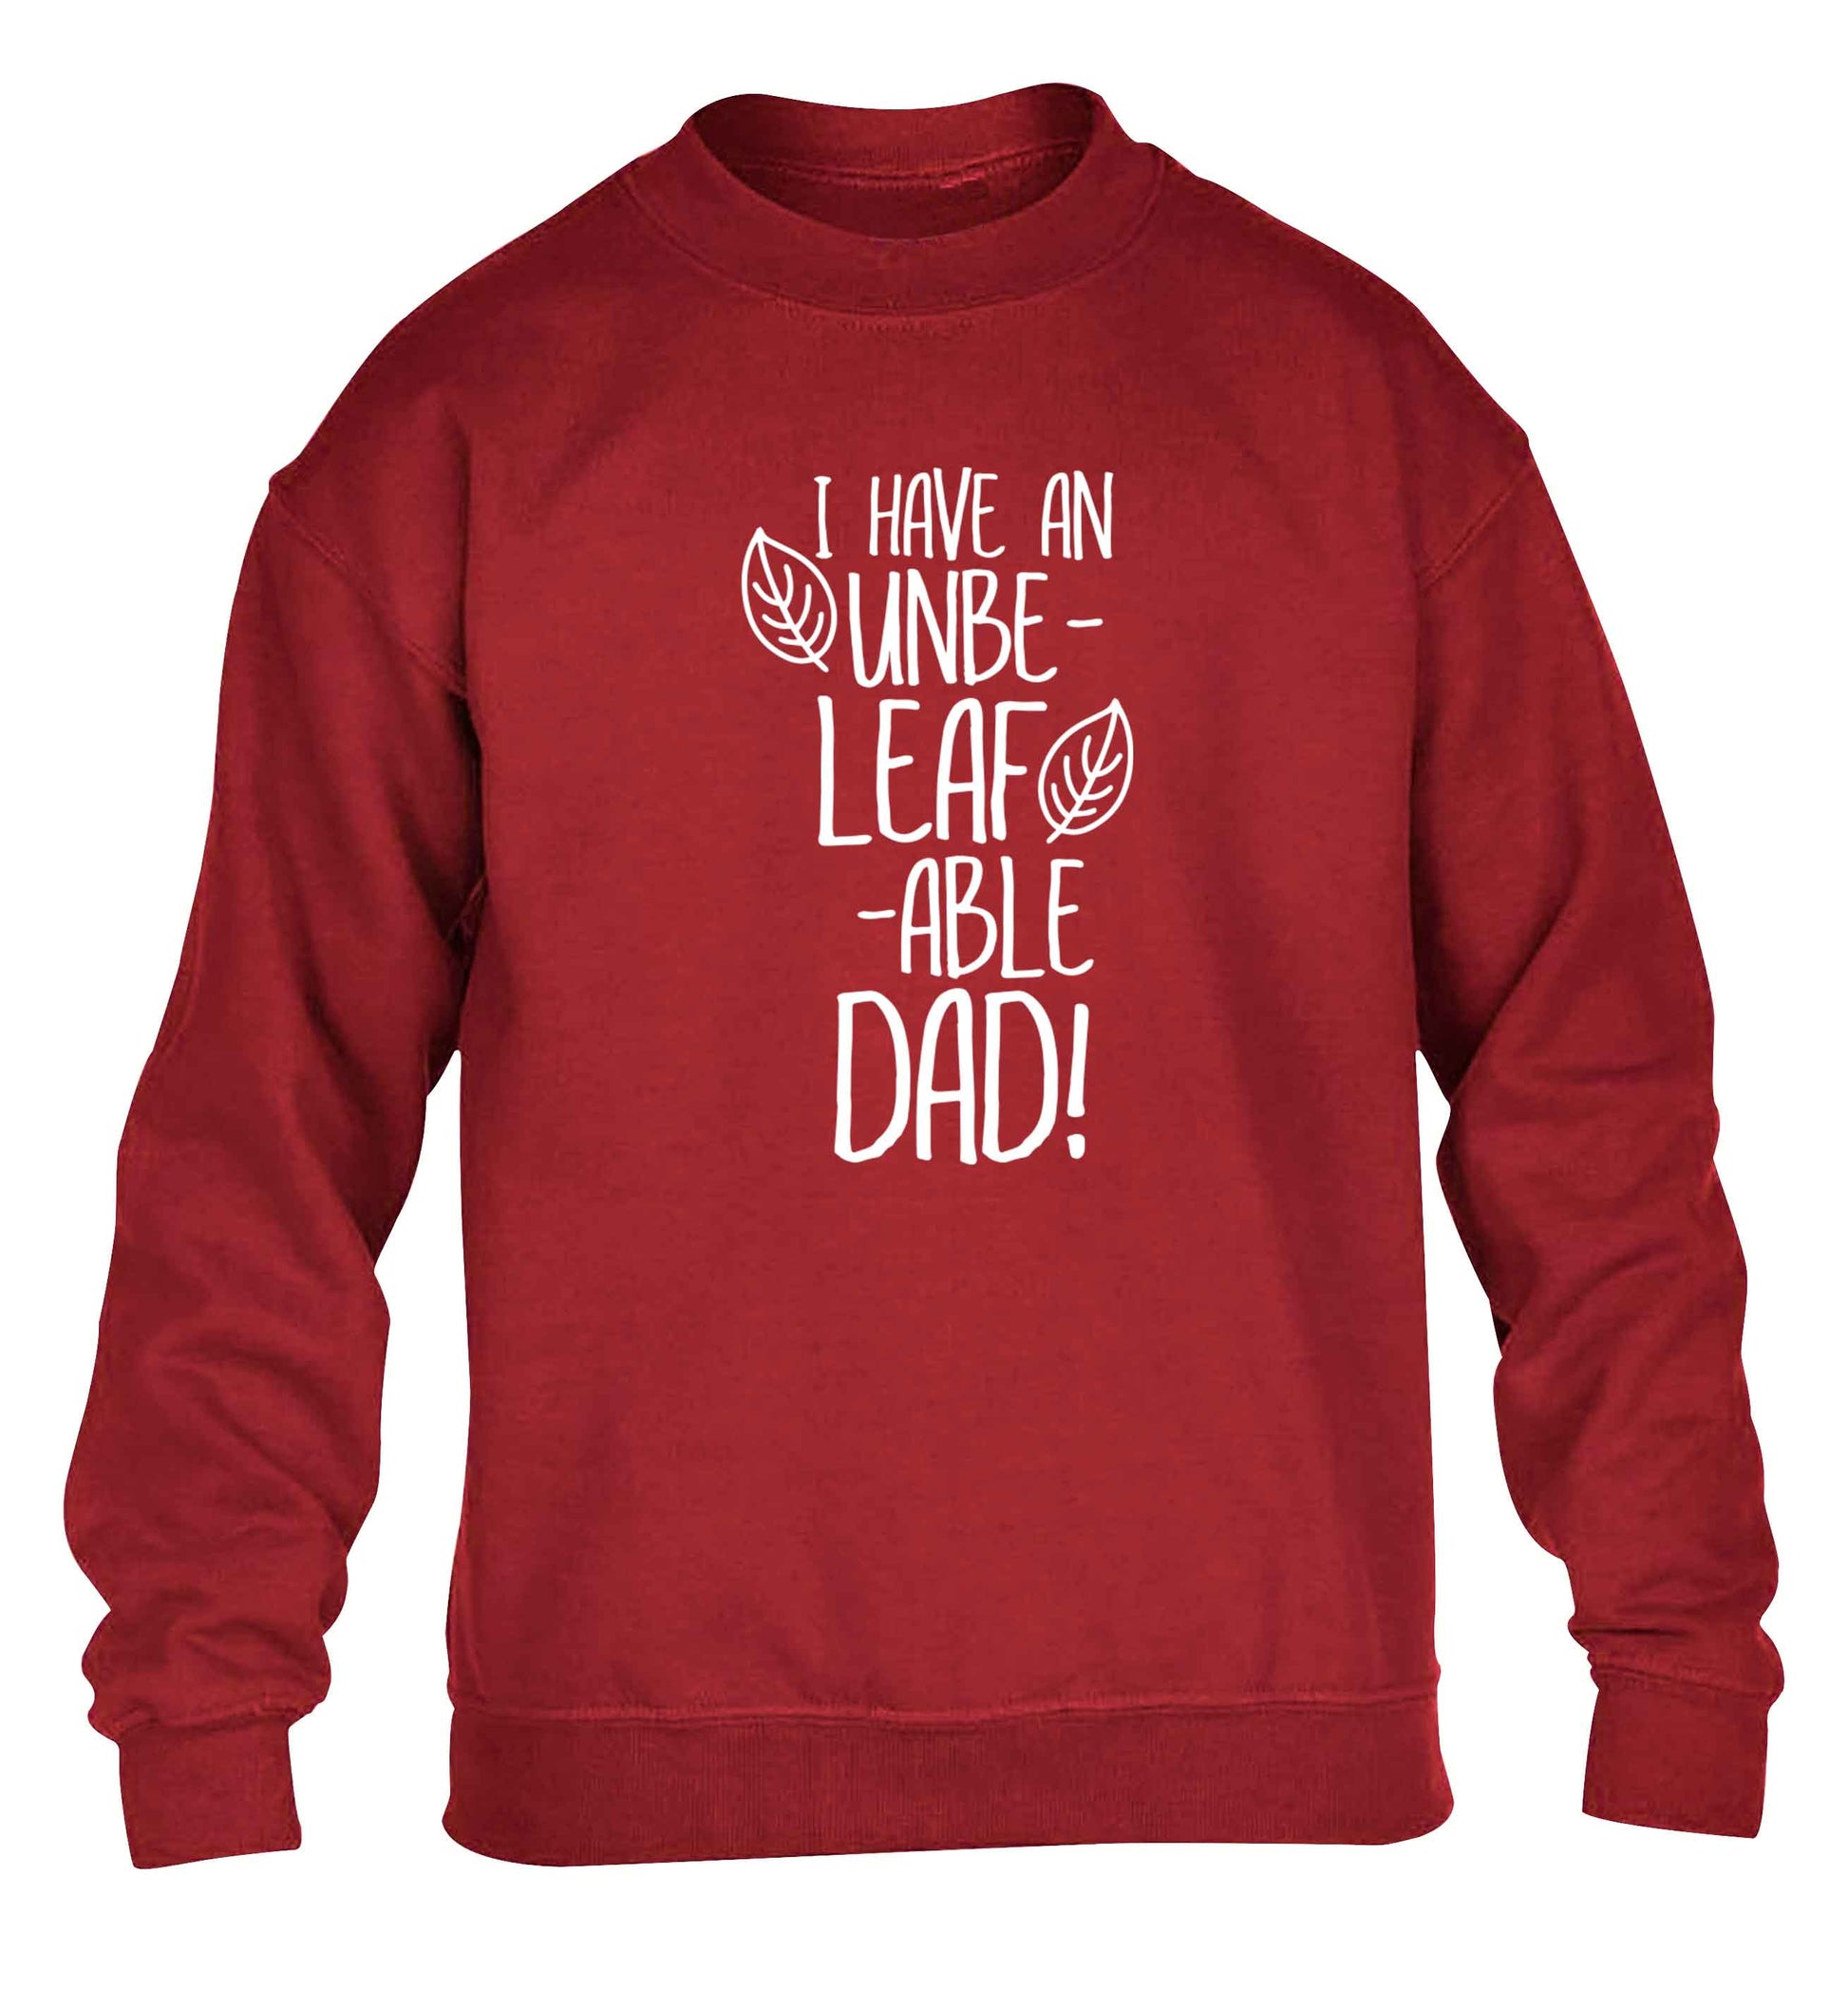 I have an unbe-leaf-able dad children's grey sweater 12-13 Years